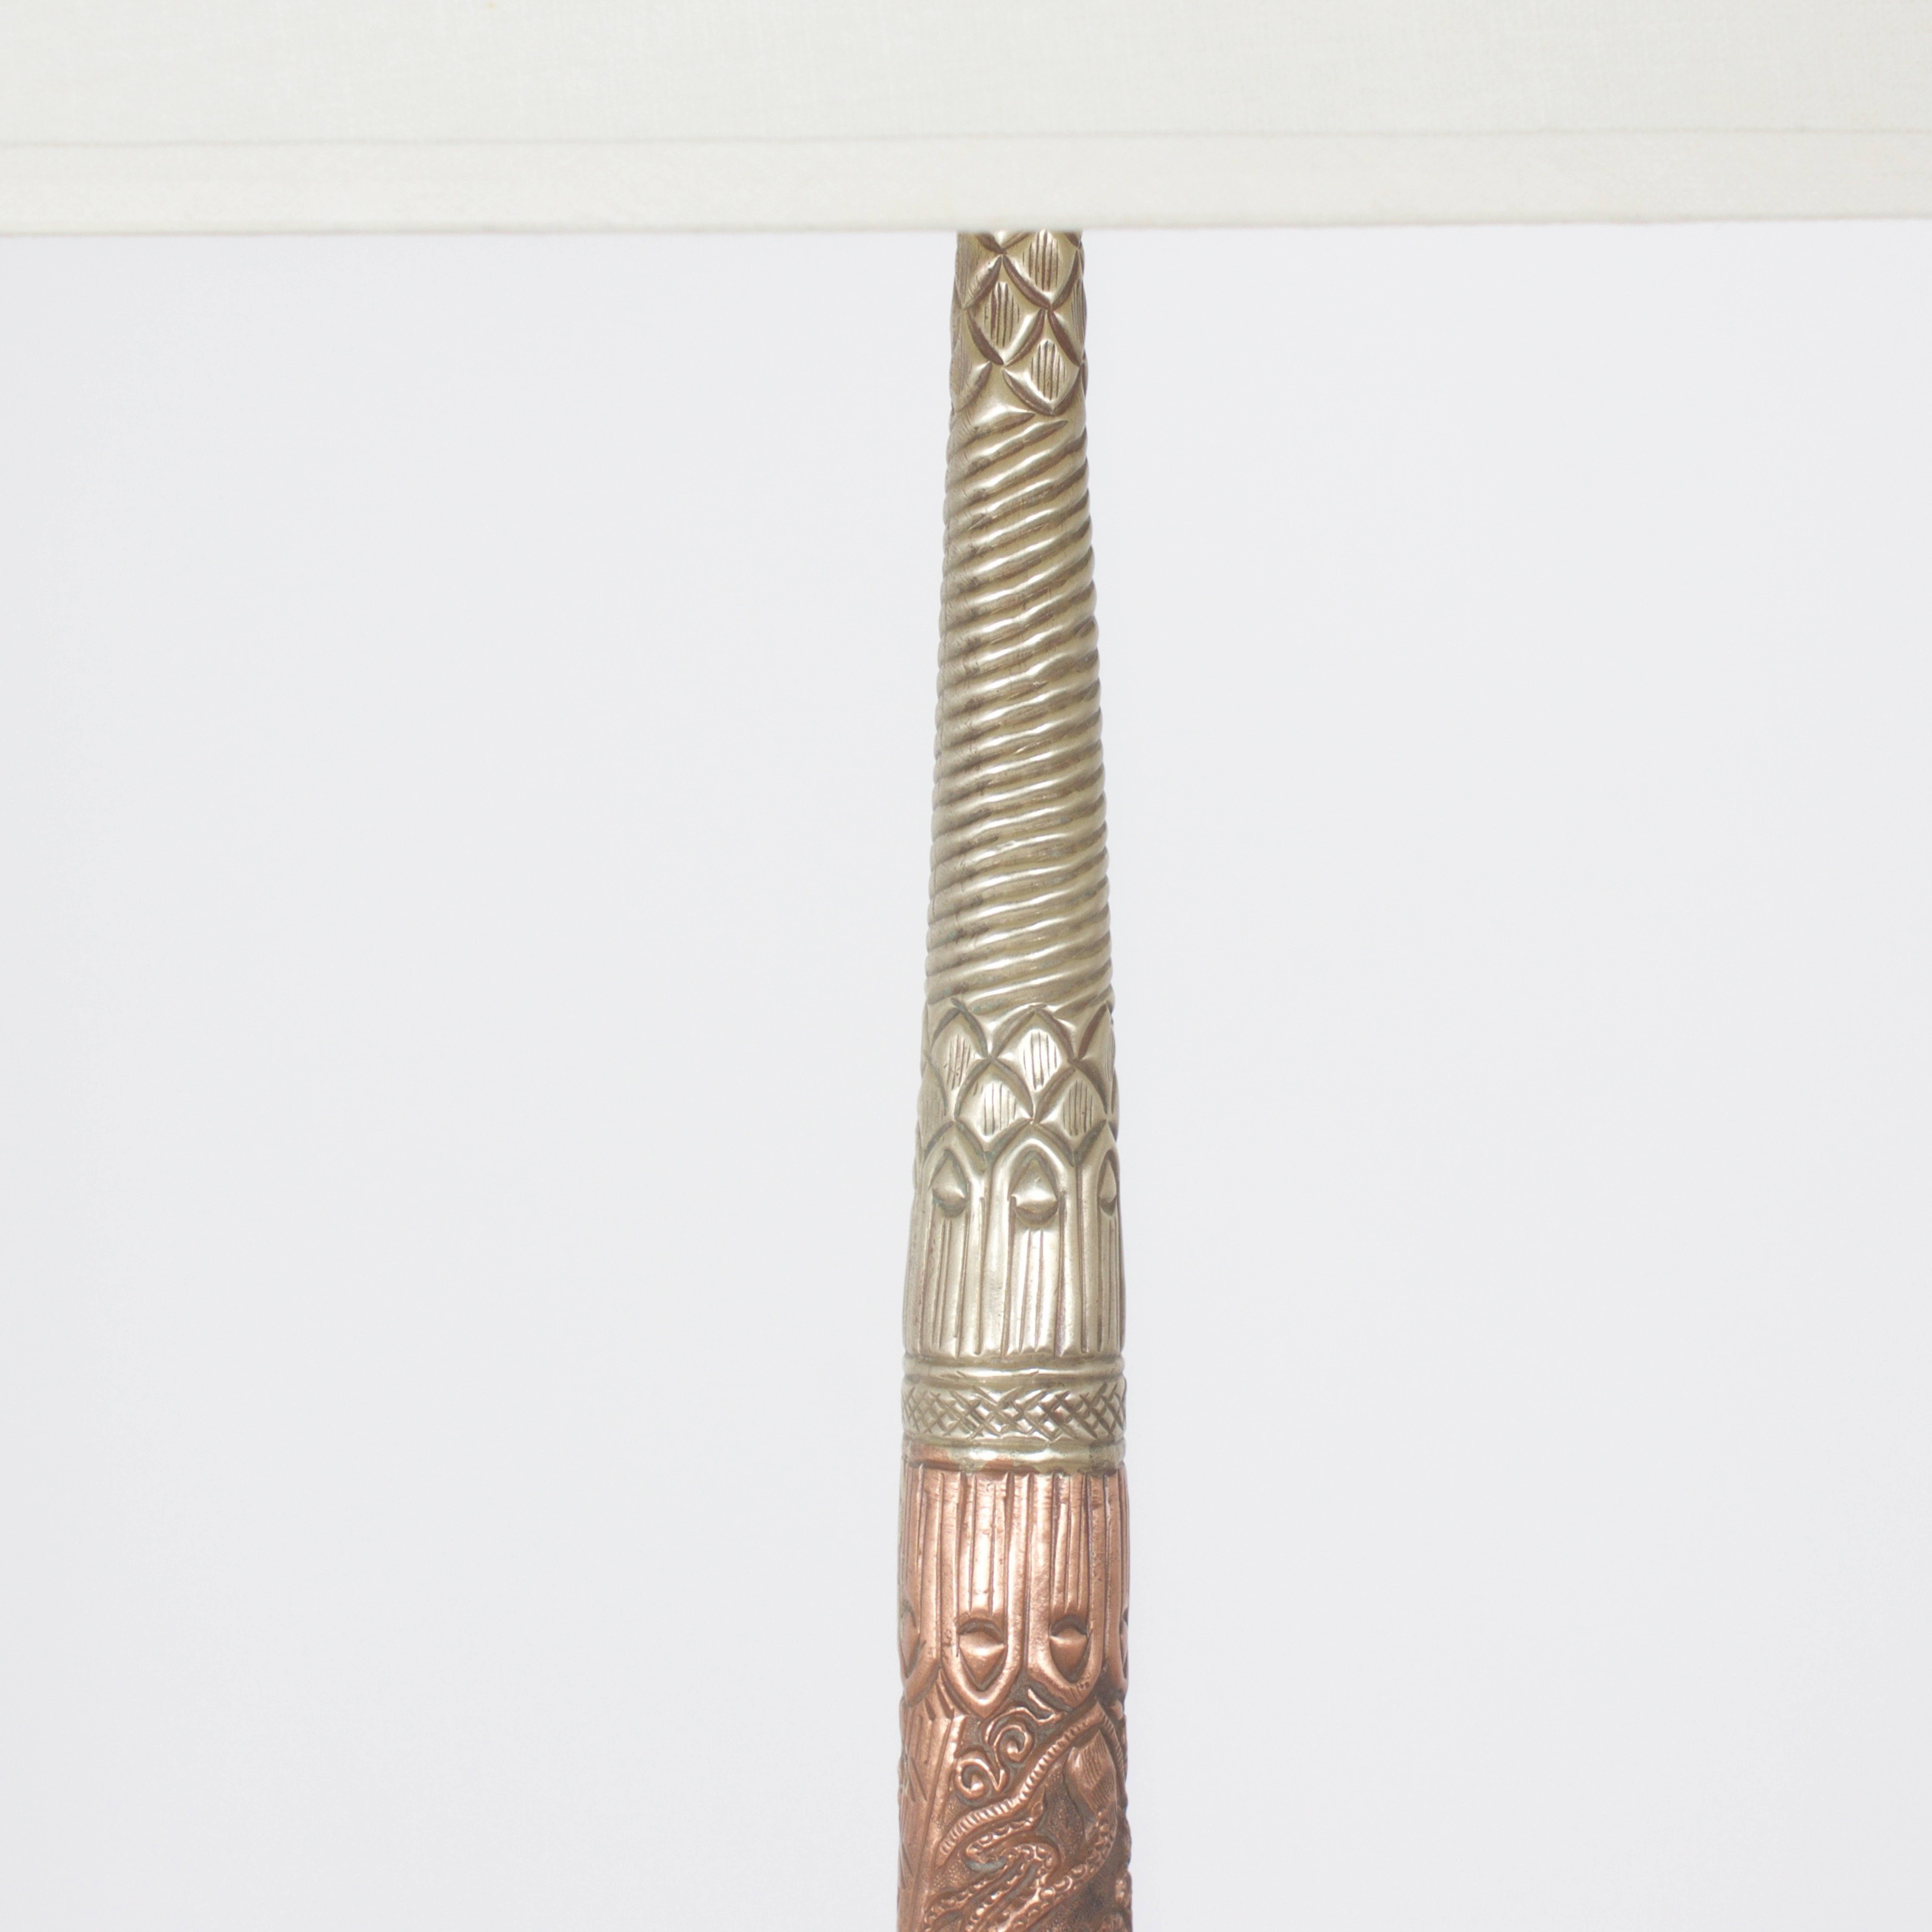 Intriguing floor lamp repurposed from a ceremonial Indian musical horn. Constructed with hand-hammered silvered metal and copper. Decorated in a dramatic motif of mythological dragons, crustaceans, and repeating floral rings. Newly wired and